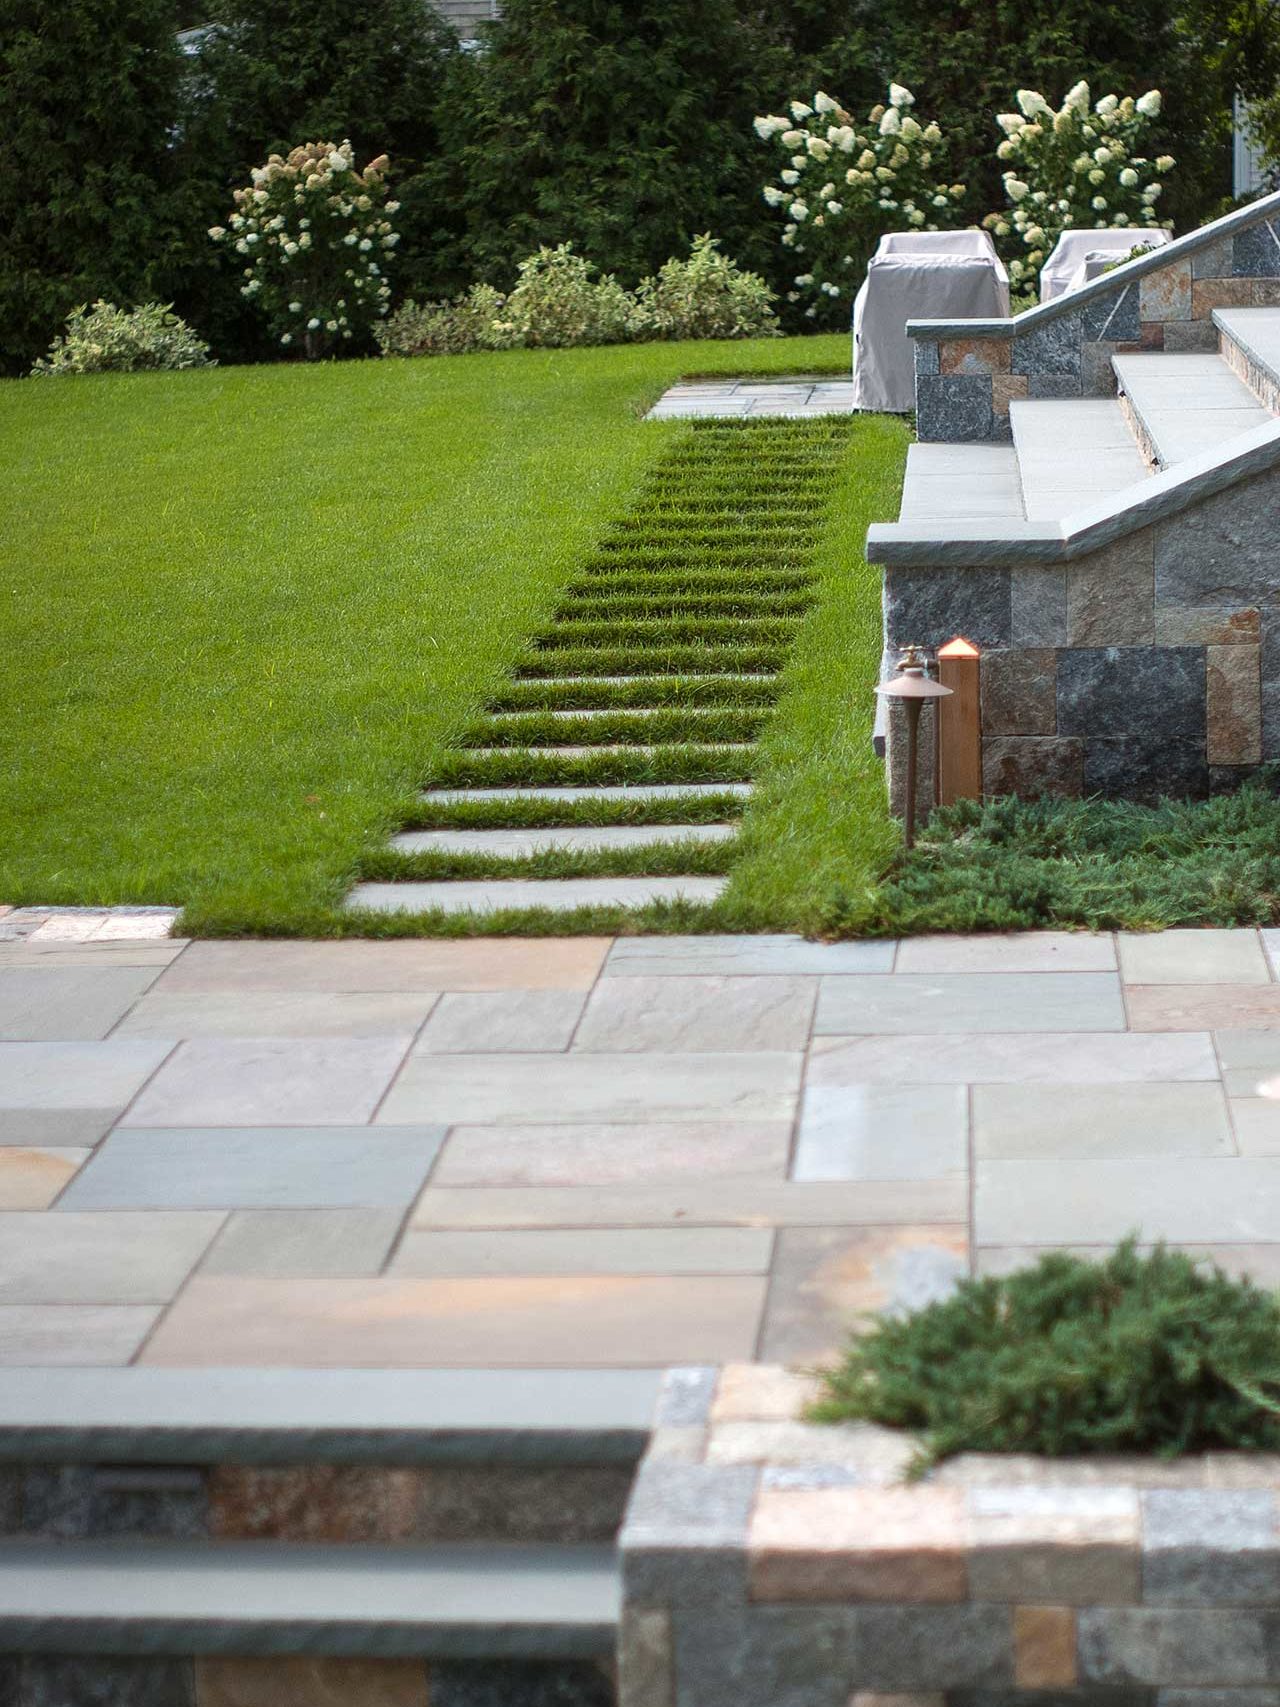 Duxbury, MA - Grainte walls blend perfectly with natural cleft full color bluestone patio surfaces.